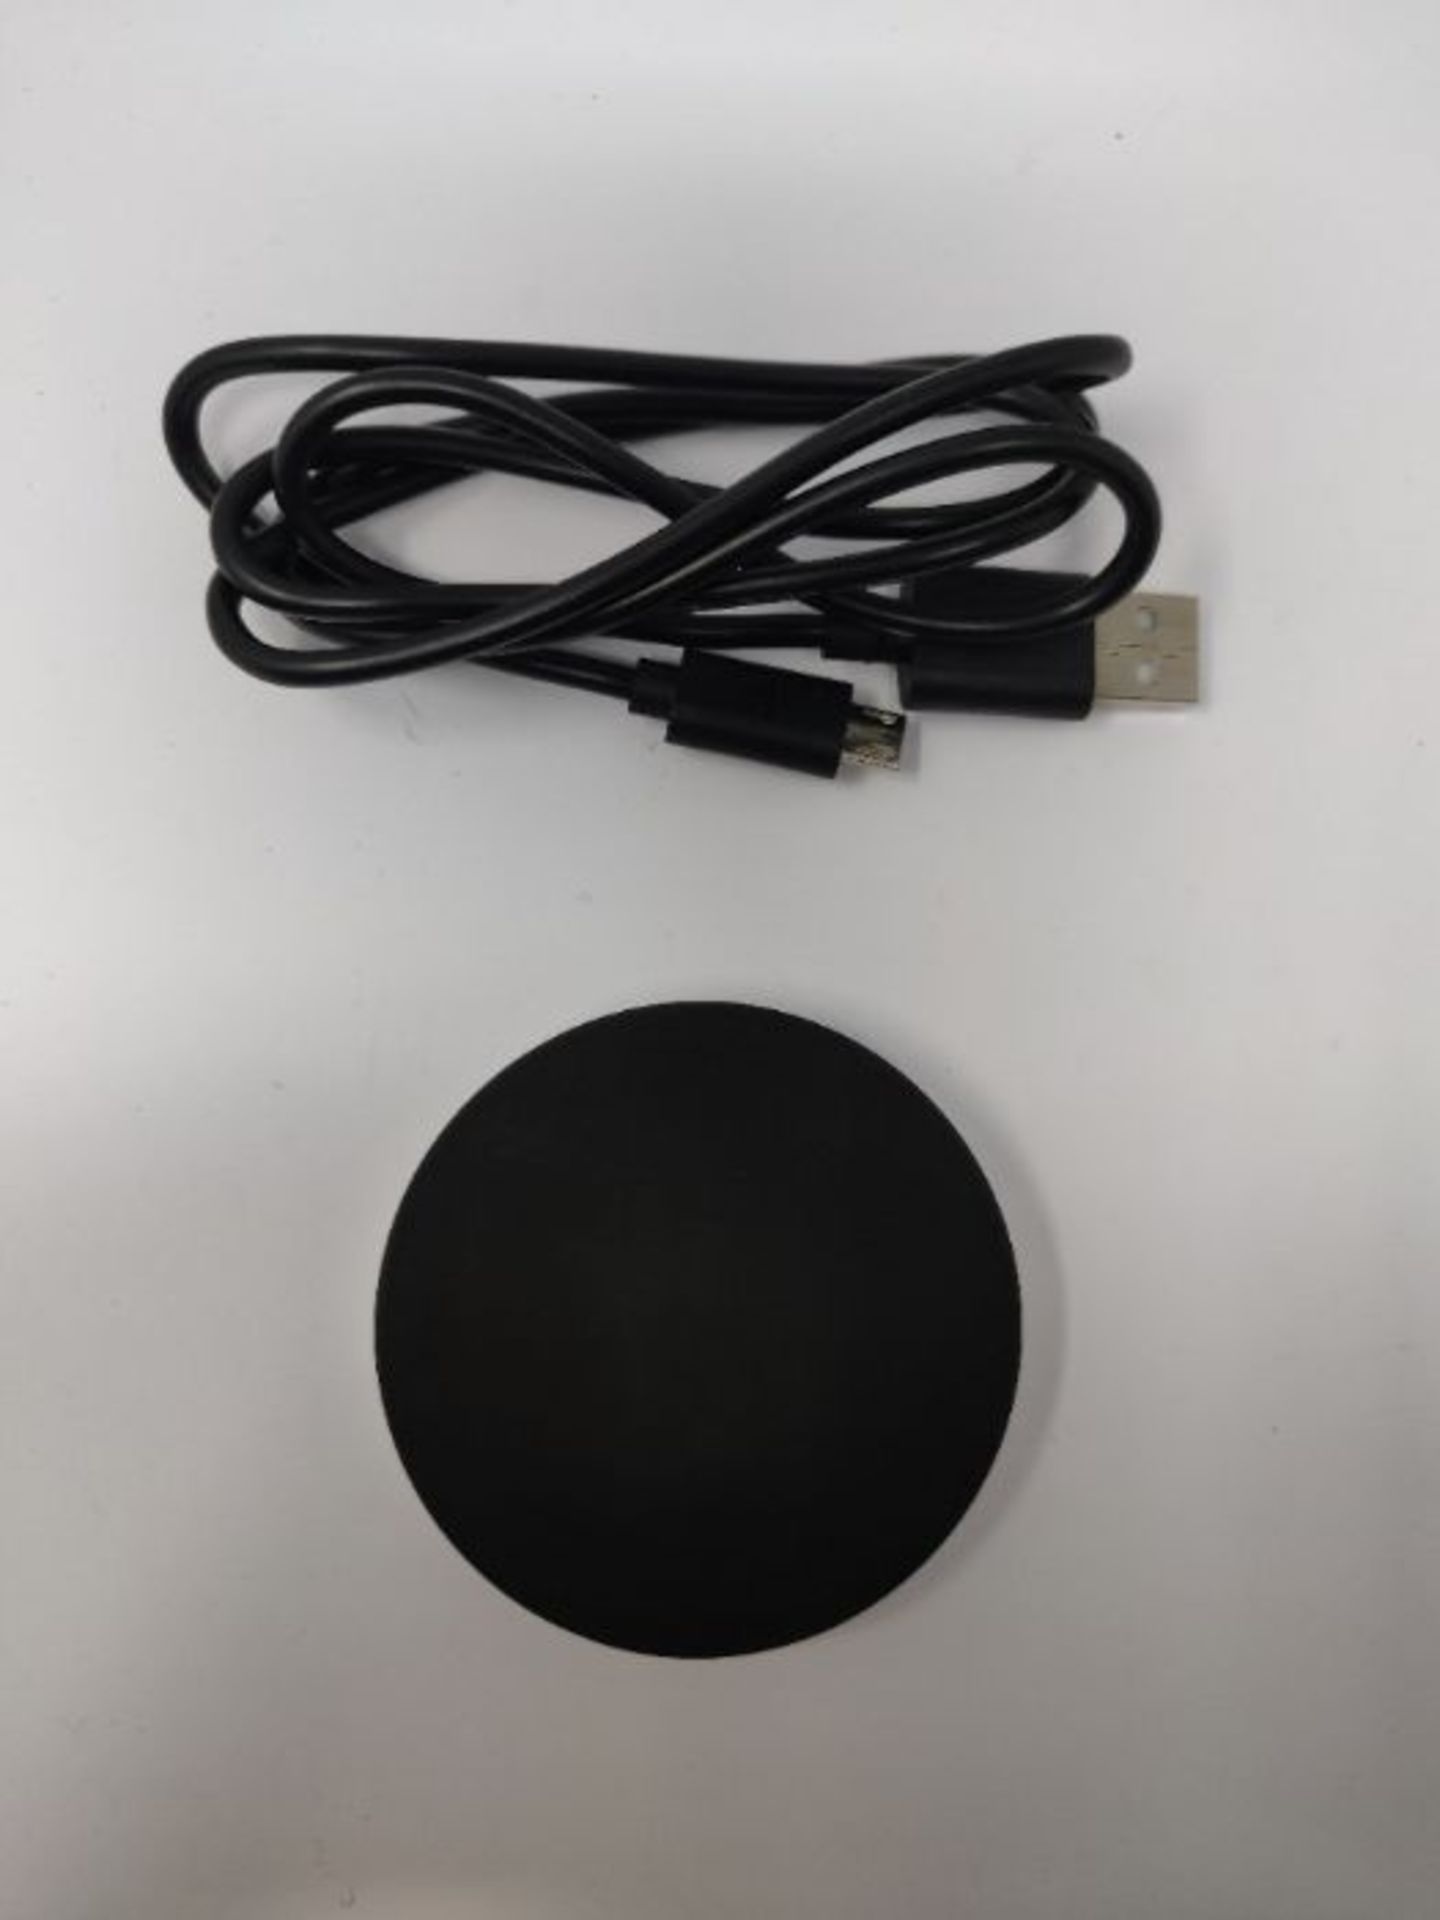 ZENS Qi-certified Single Wireless Charger Round 5W Output Black, USB Cable Included - - Image 3 of 3